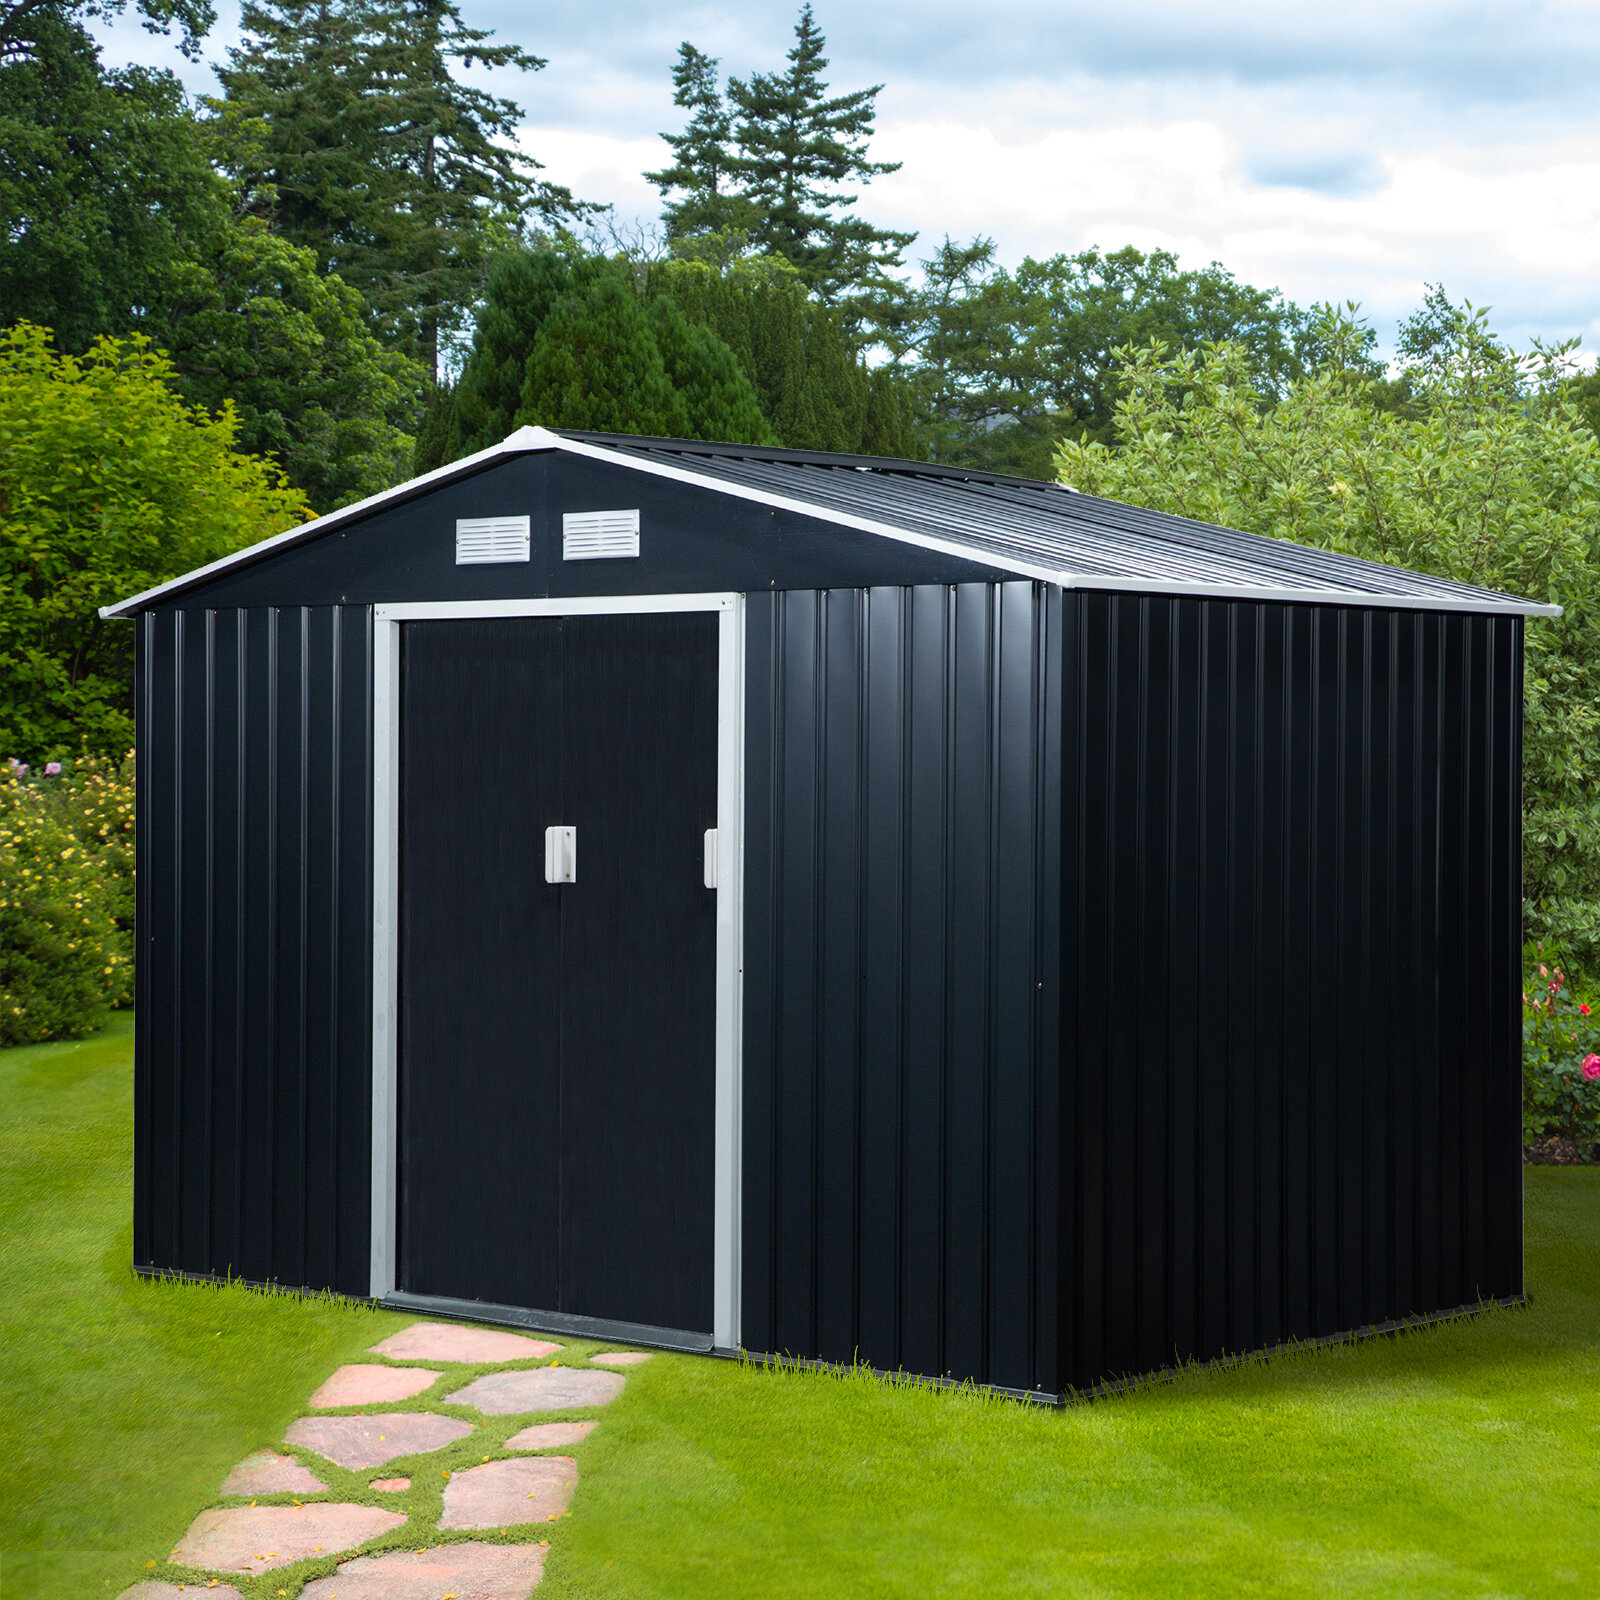 for Backyard Garden Patio Lawn Steel Utility Tool Storage House With Double Door & Lock 6 x 4 Outdoor Metal Storage Shed 